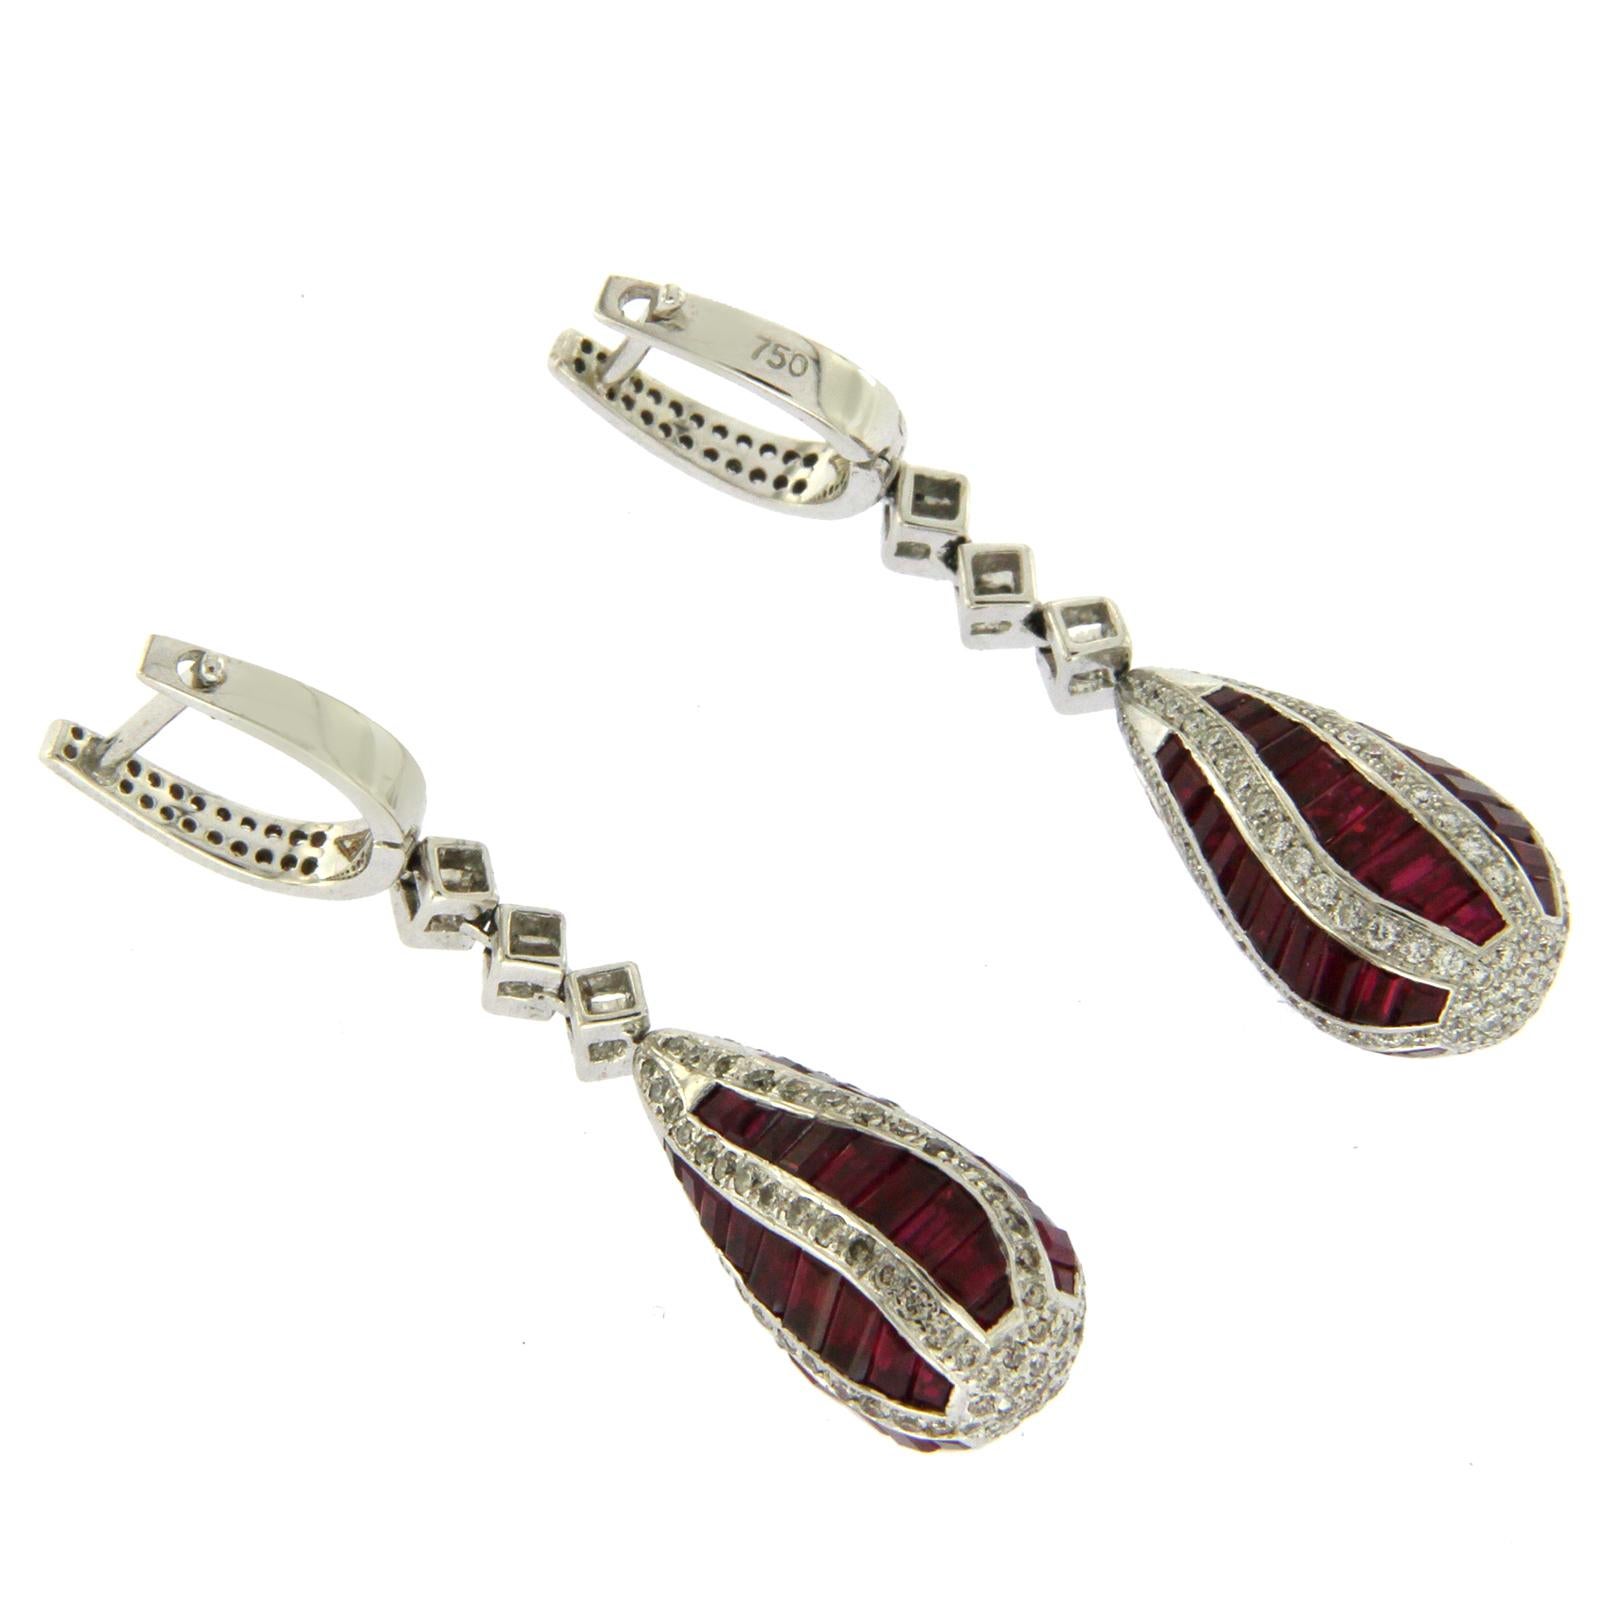 Type: Earrings
Height: 37 mm
Width: 9 mm
Metal: White Gold
Metal Purity: 18K
Hallmarks: 18K
Total Weight: 6.5 Grams
Stone Type: 0.21 Ct Diamonds VS2 G-F 7.98 CT Natural Ruby
Condition: New
Stock Number: BL12